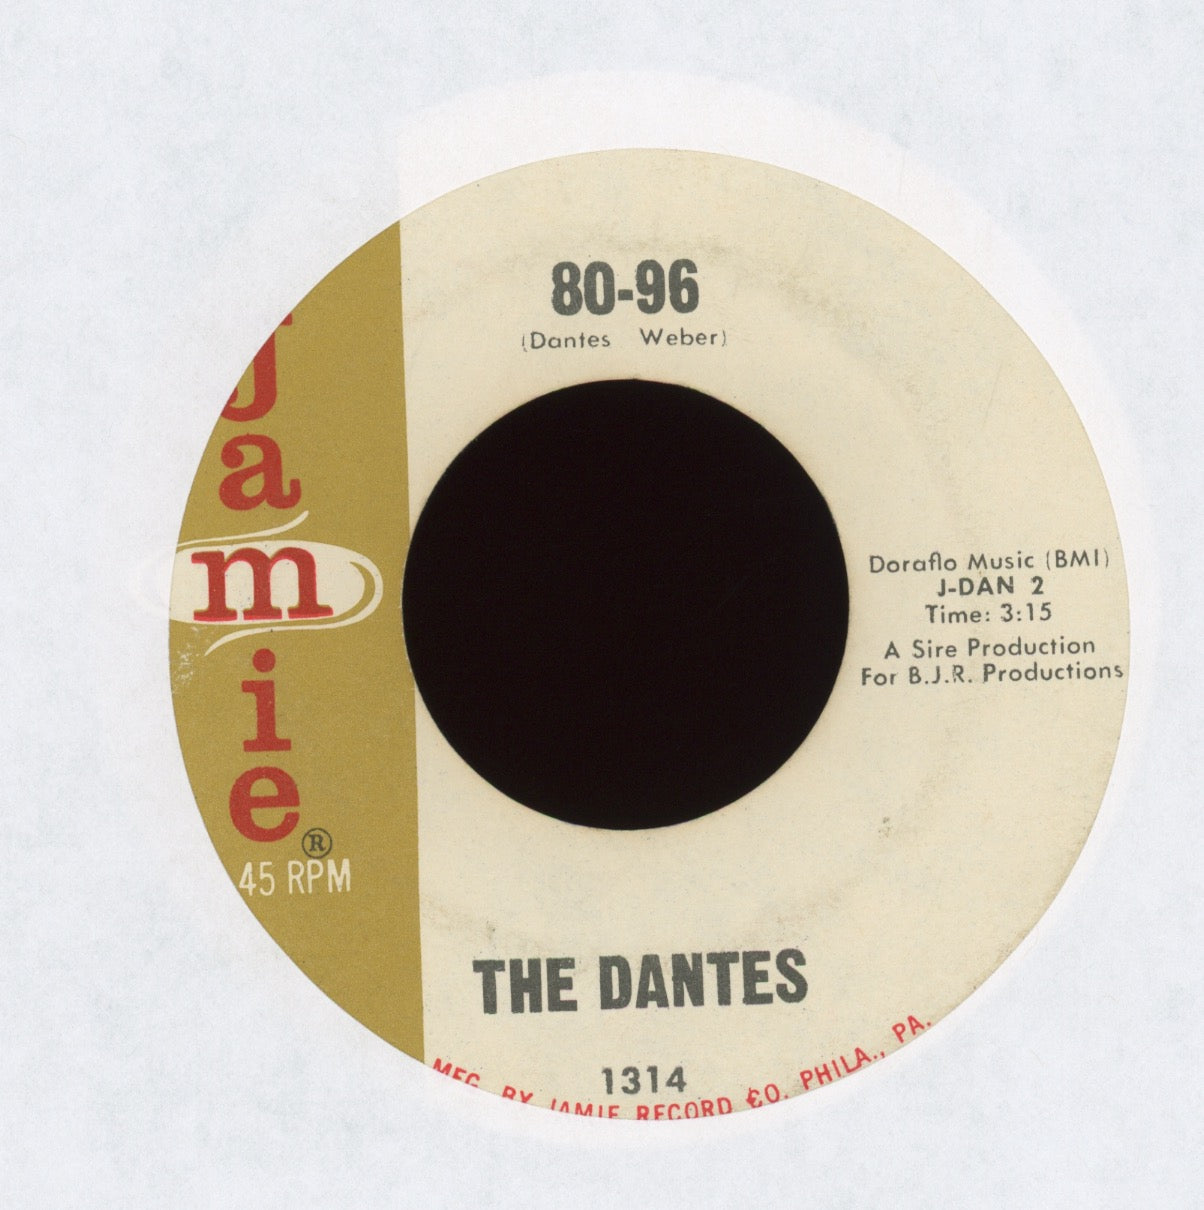 The Dantes - Can't Get Enough Of Your Love on Jamie Garage 45